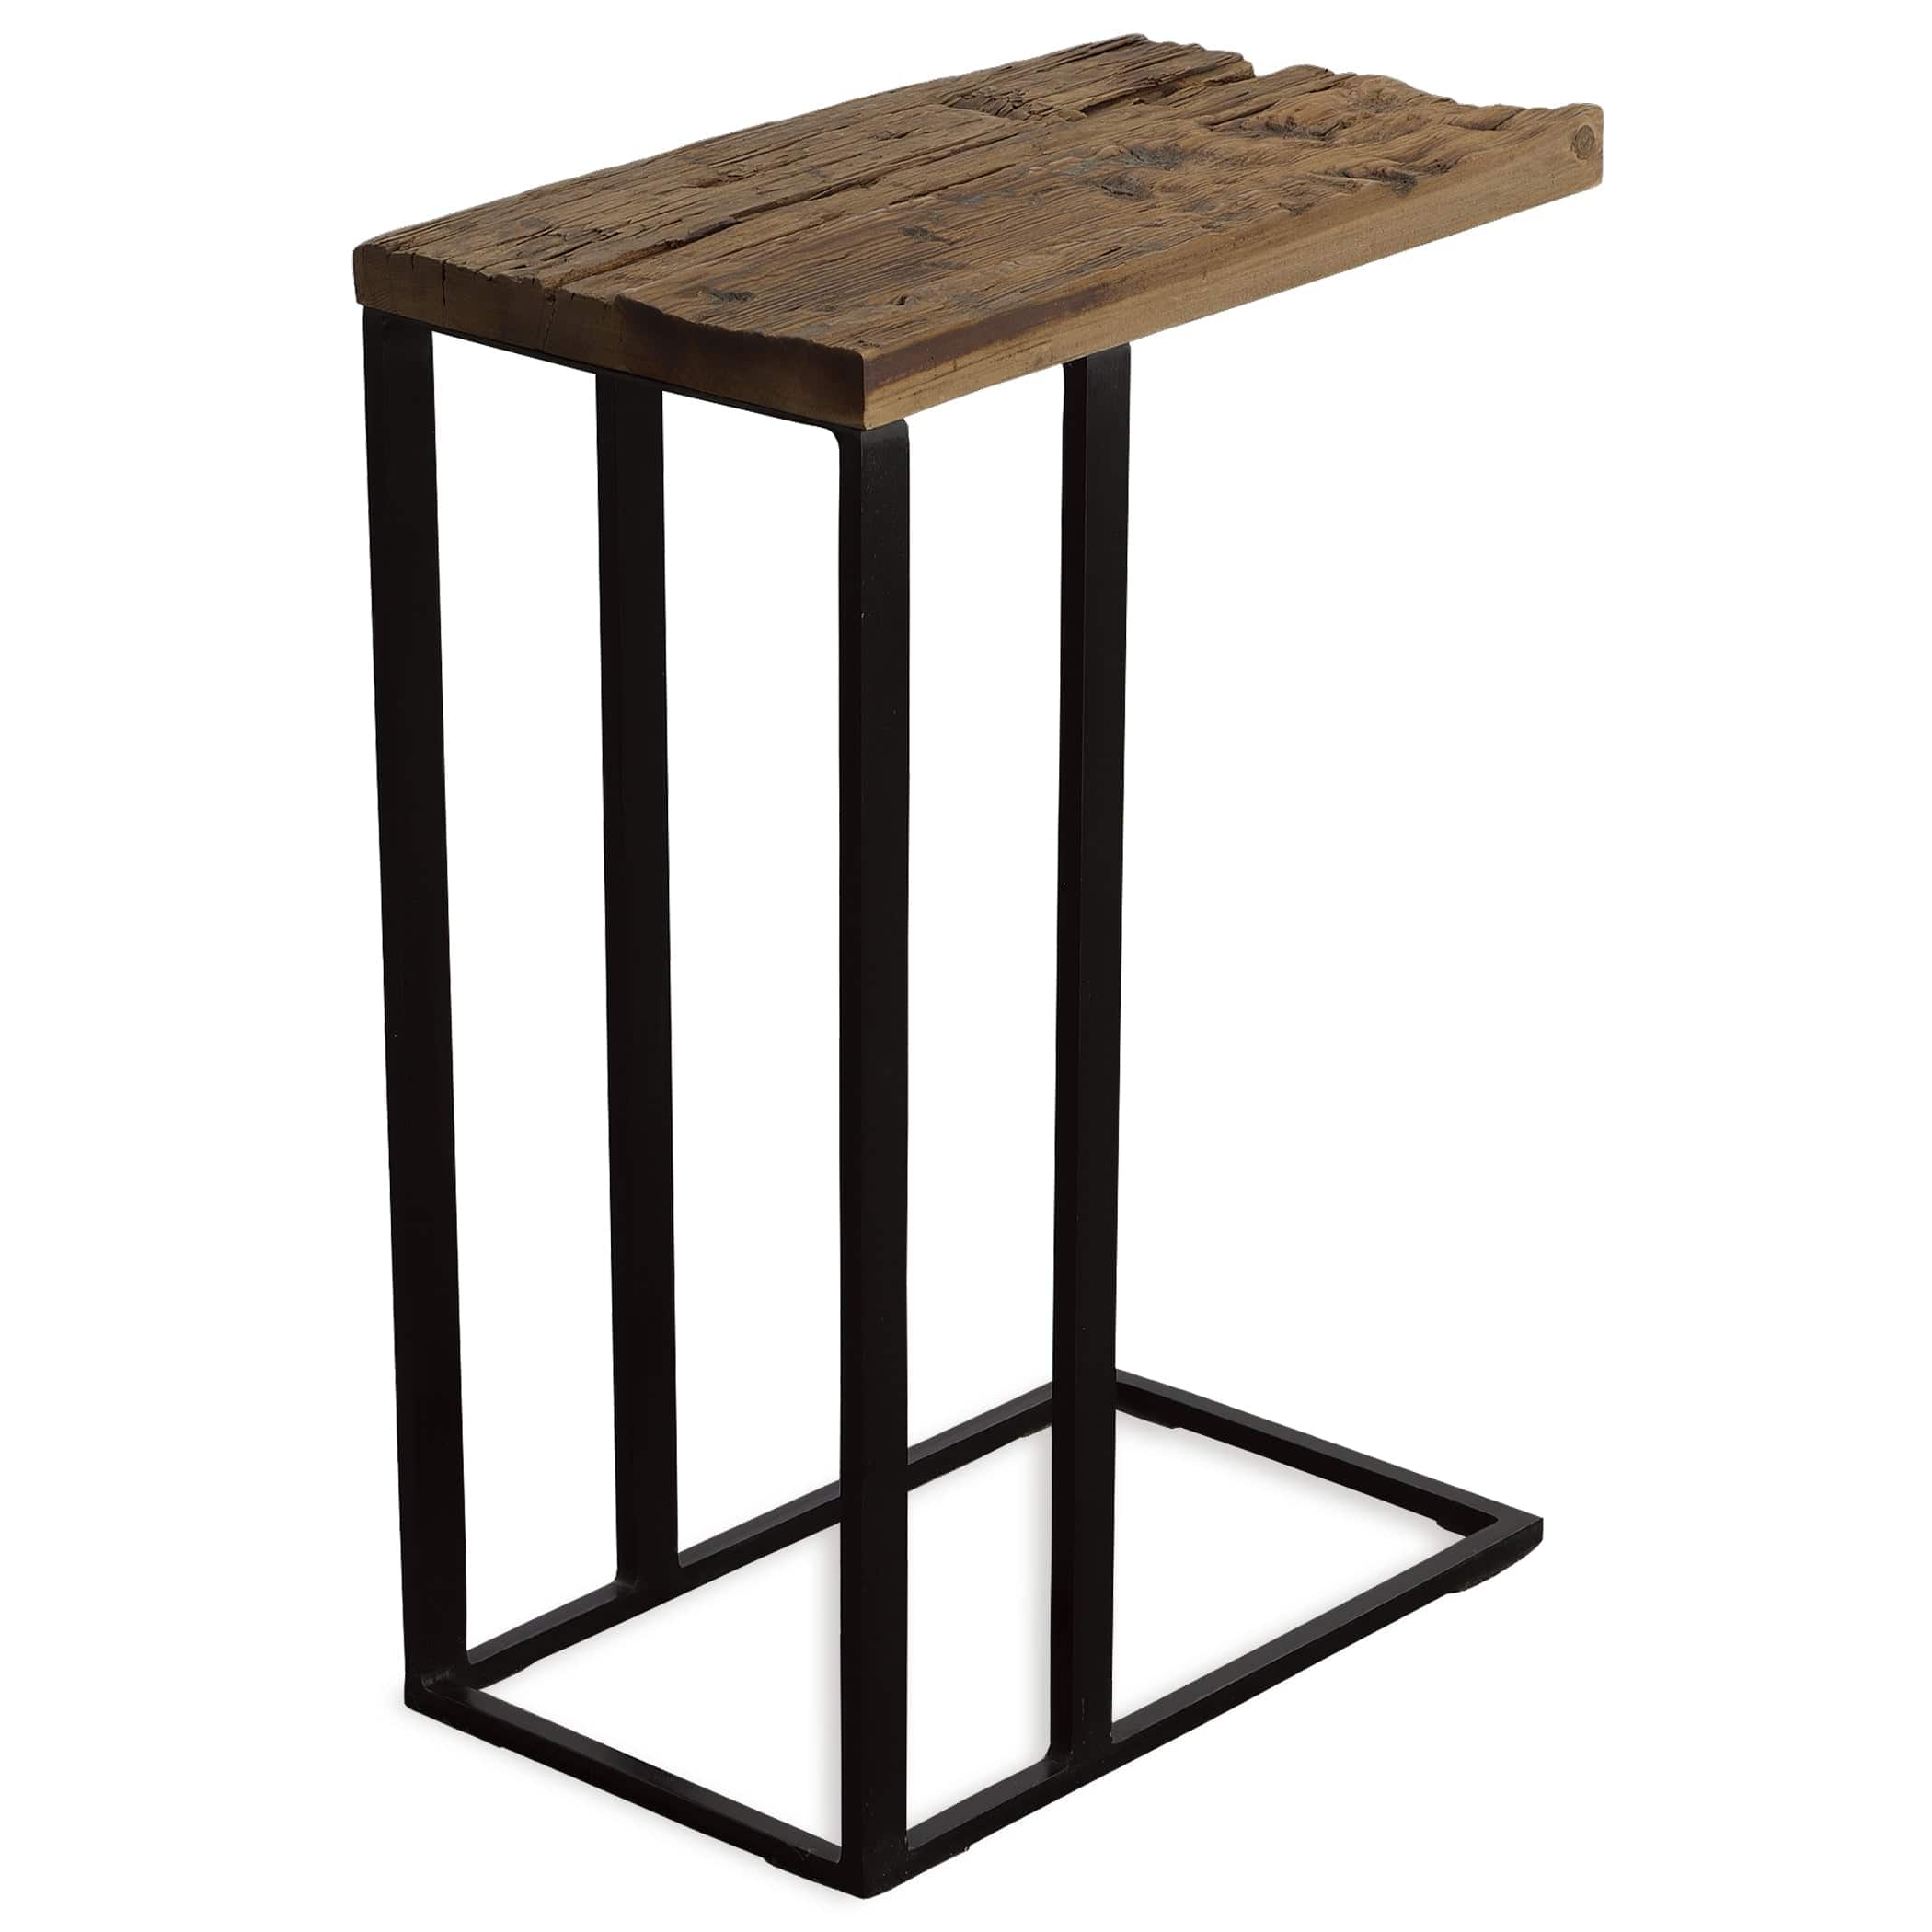 Union Reclaimed Wood Accent Table Uttermost